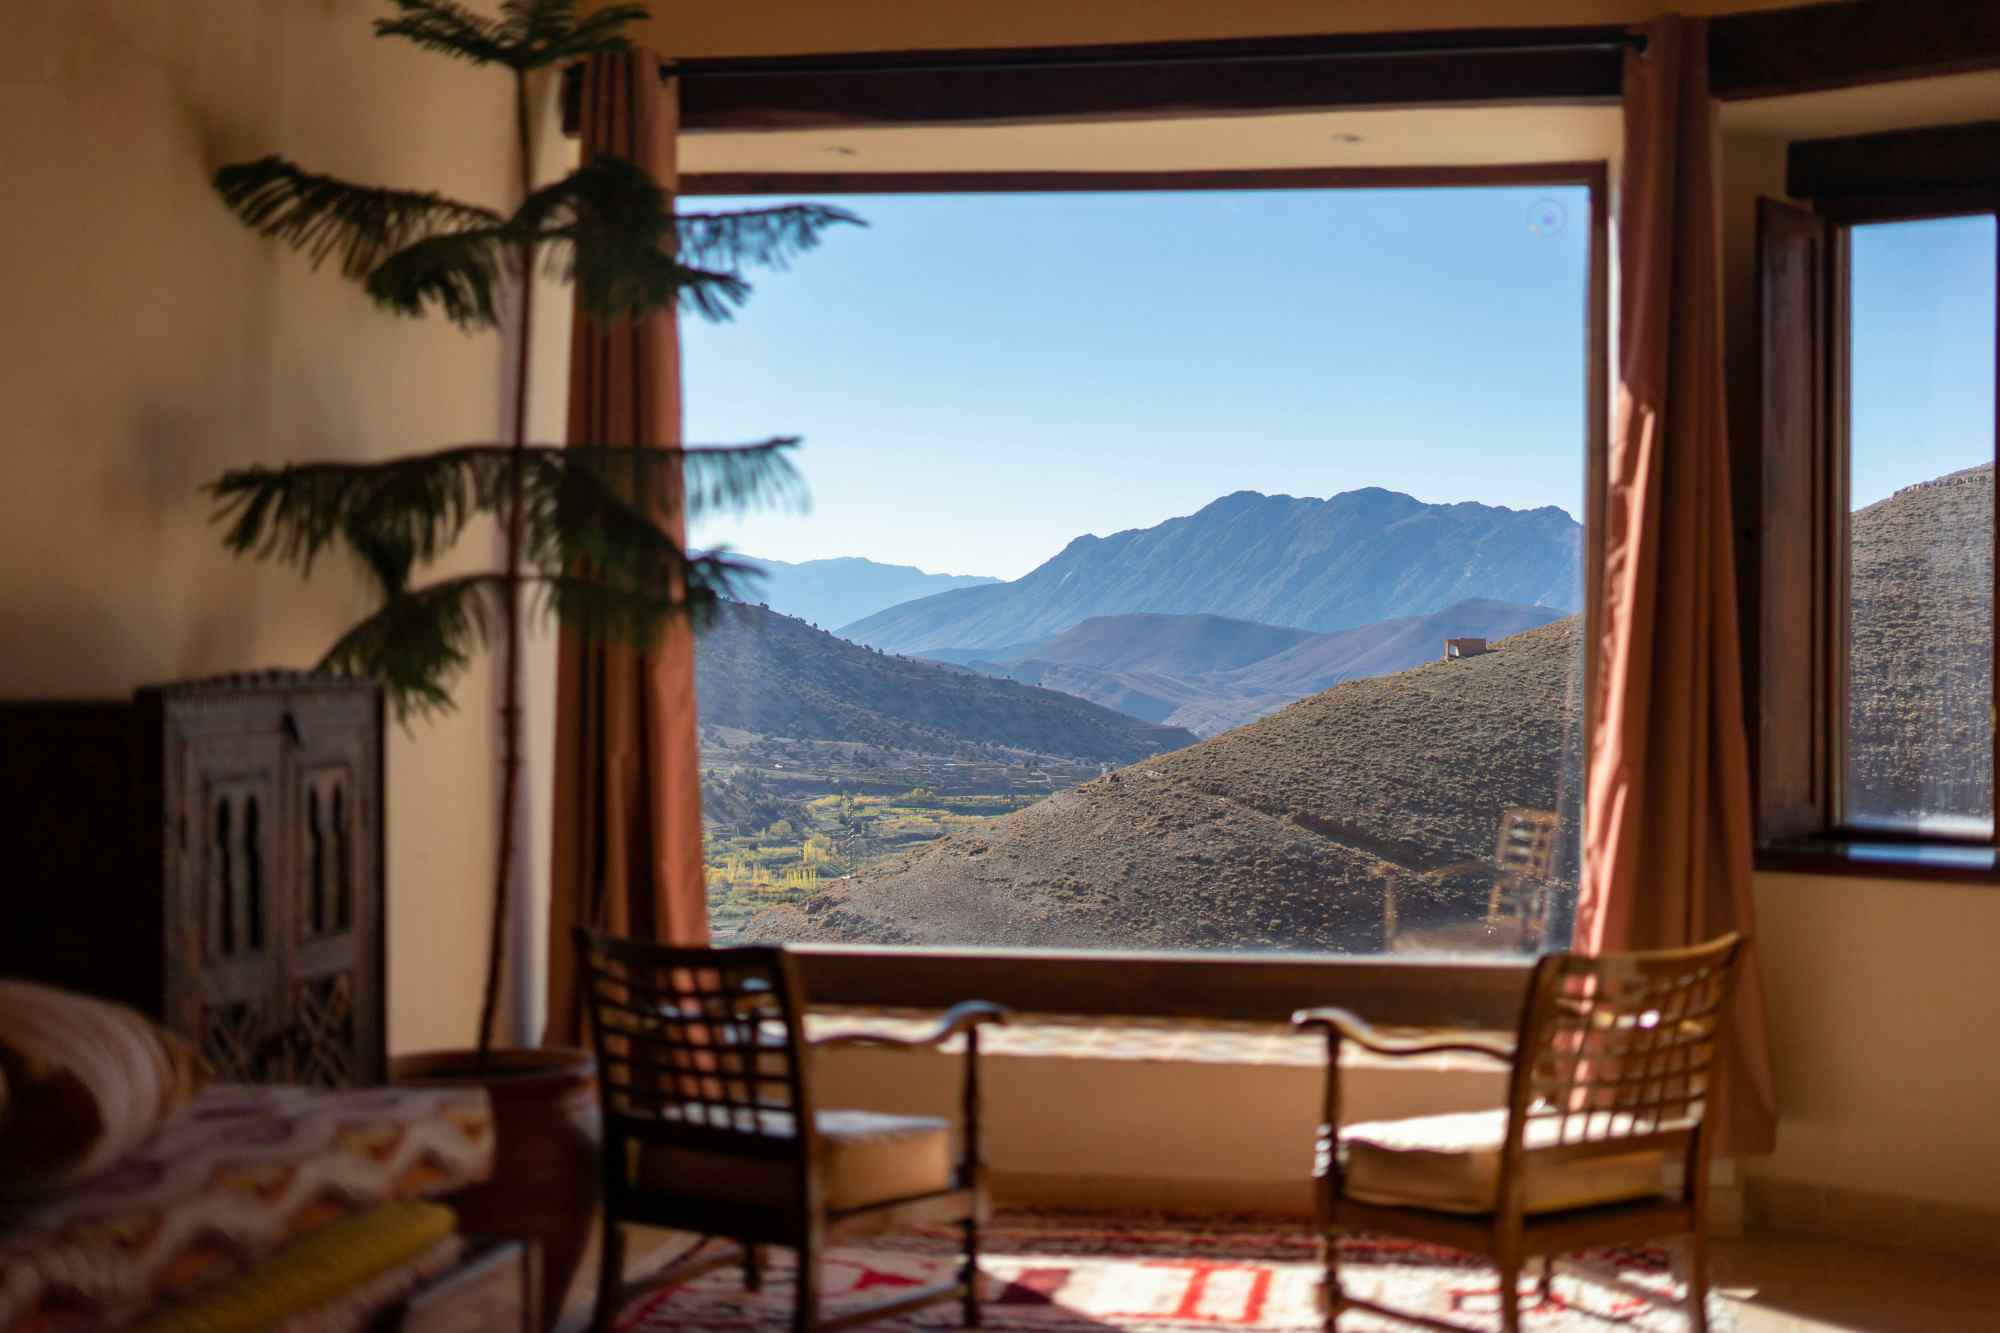 2 chairs in front of a window overlooking beautiful mountain scenery in Morocco